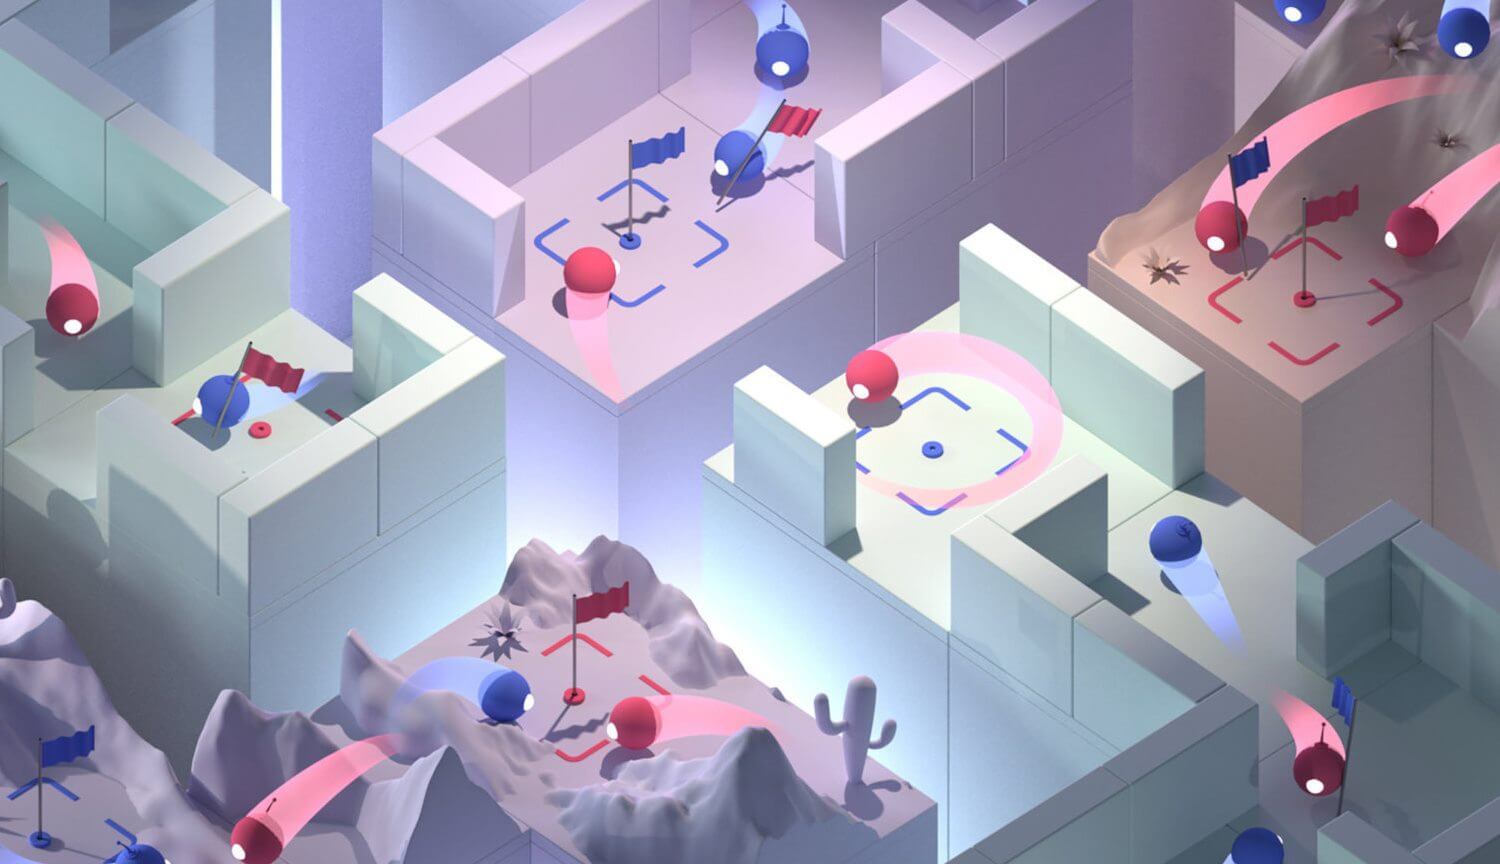 Artificial intelligence DeepMind beat people at Quake III Arena